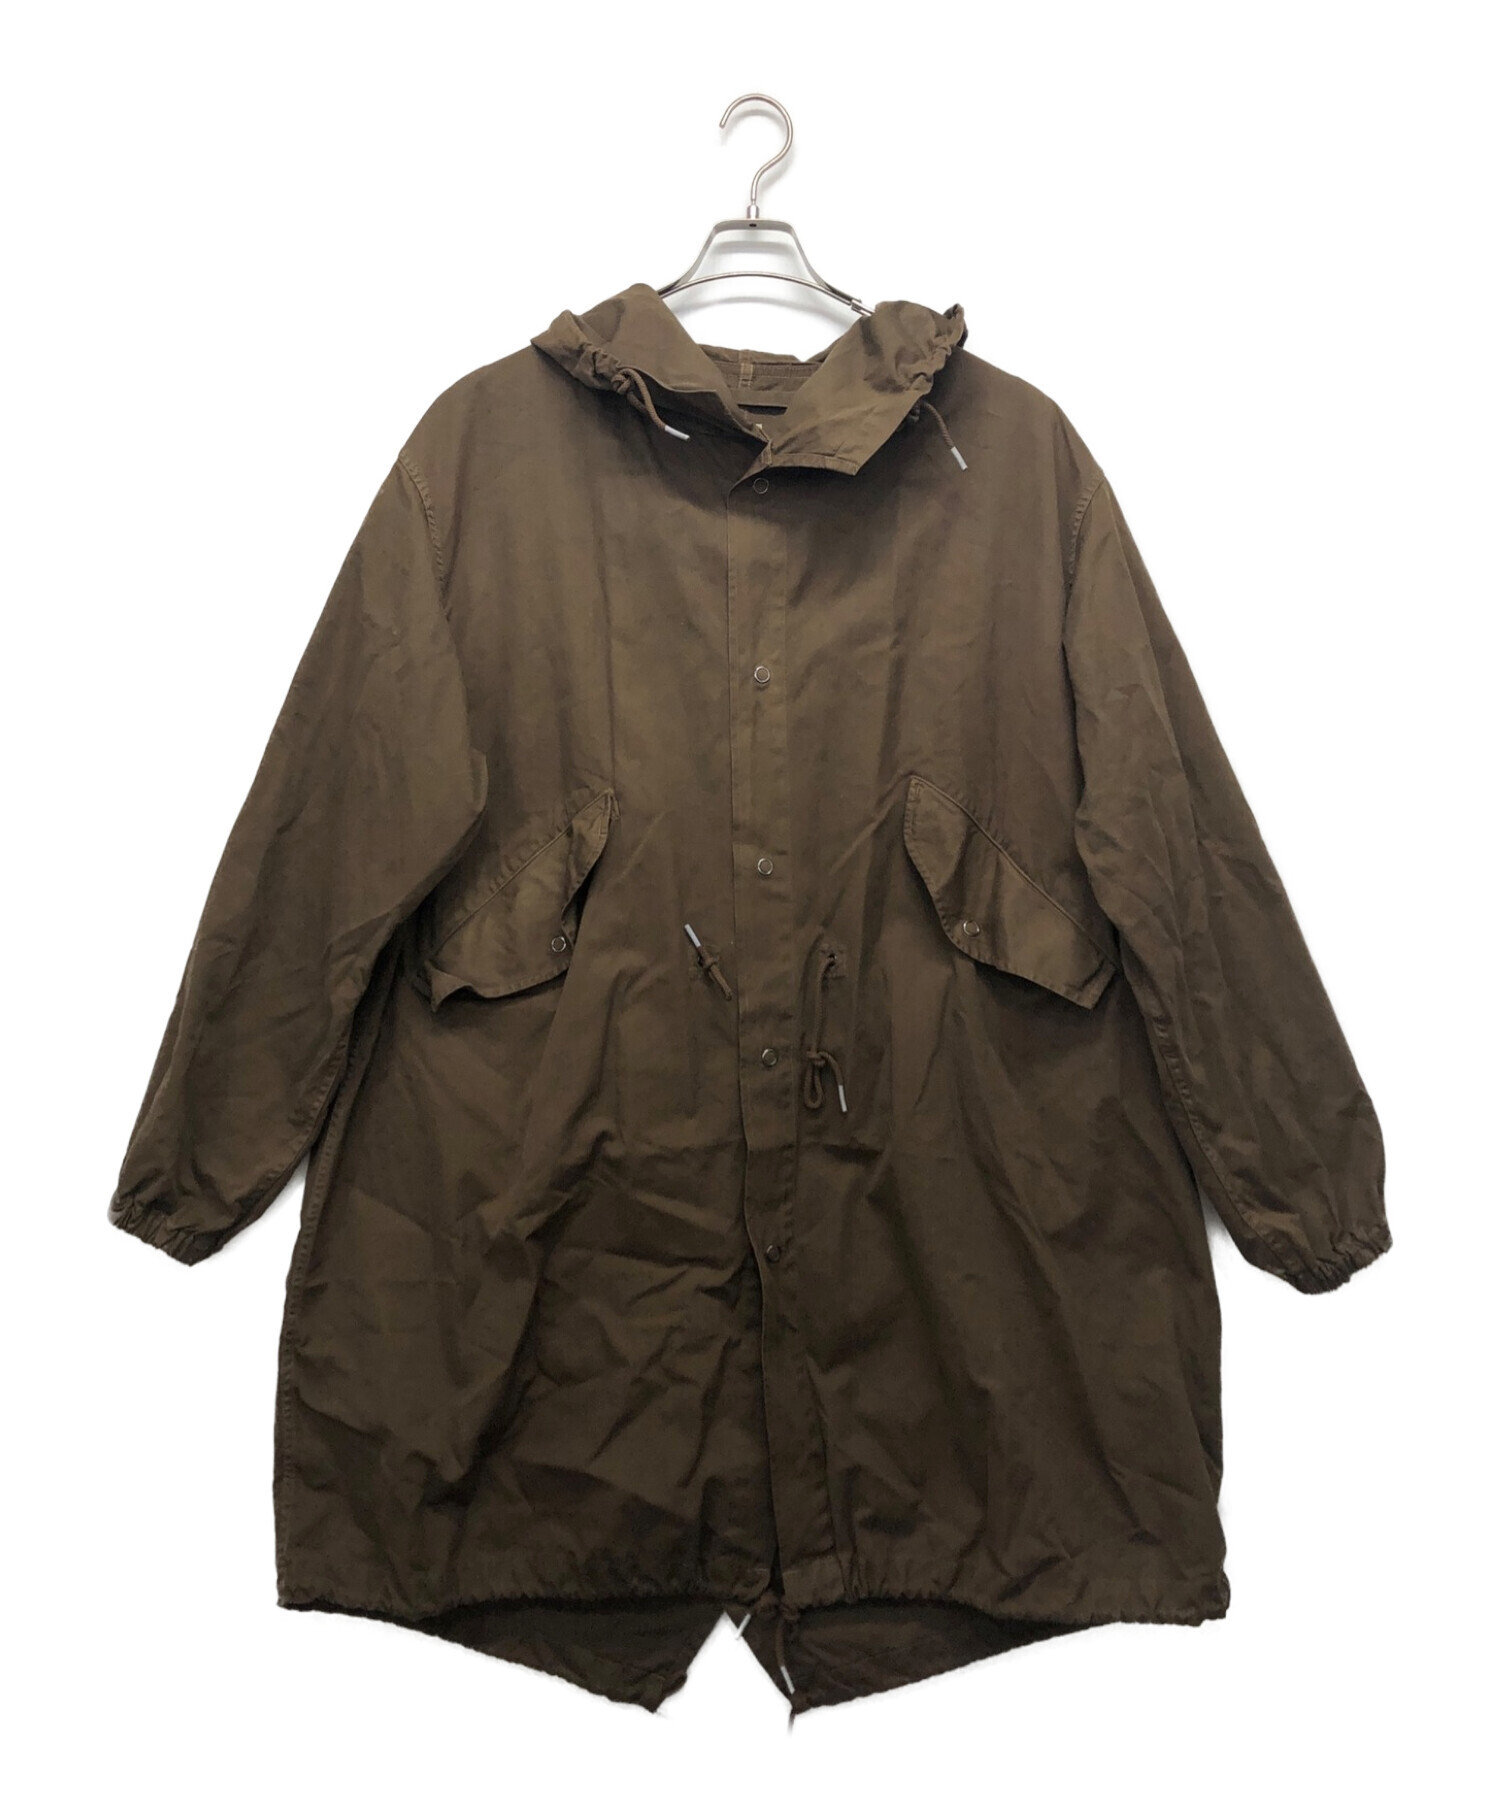 trade mark GOLD wether snow parka